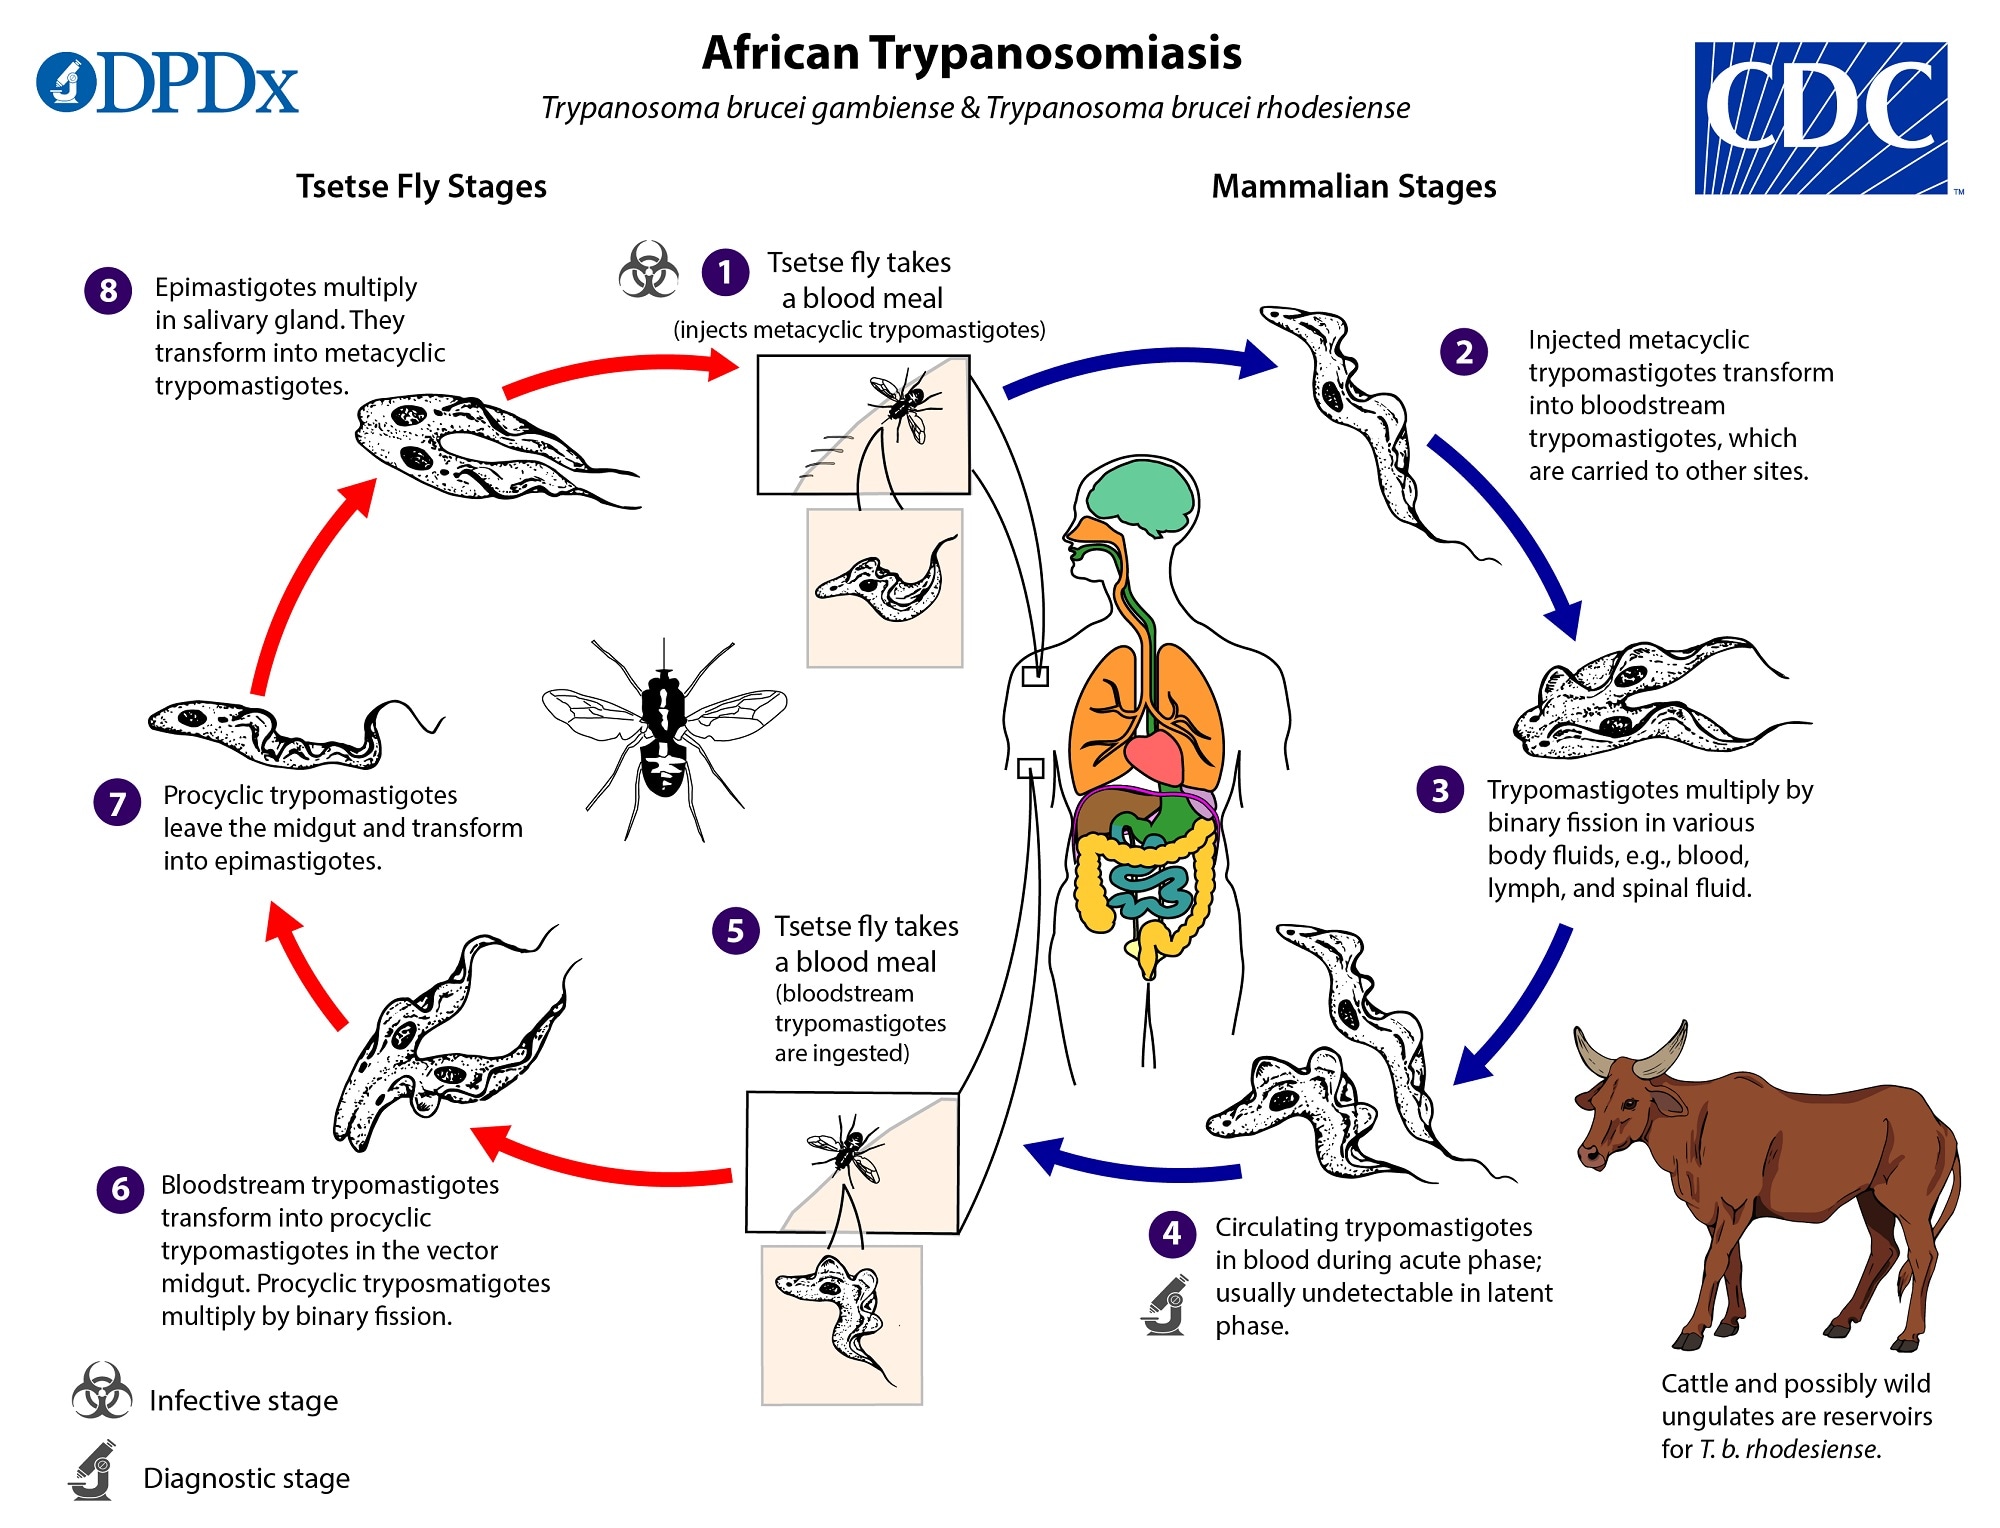 CDC - African Trypanosomiasis - Biology